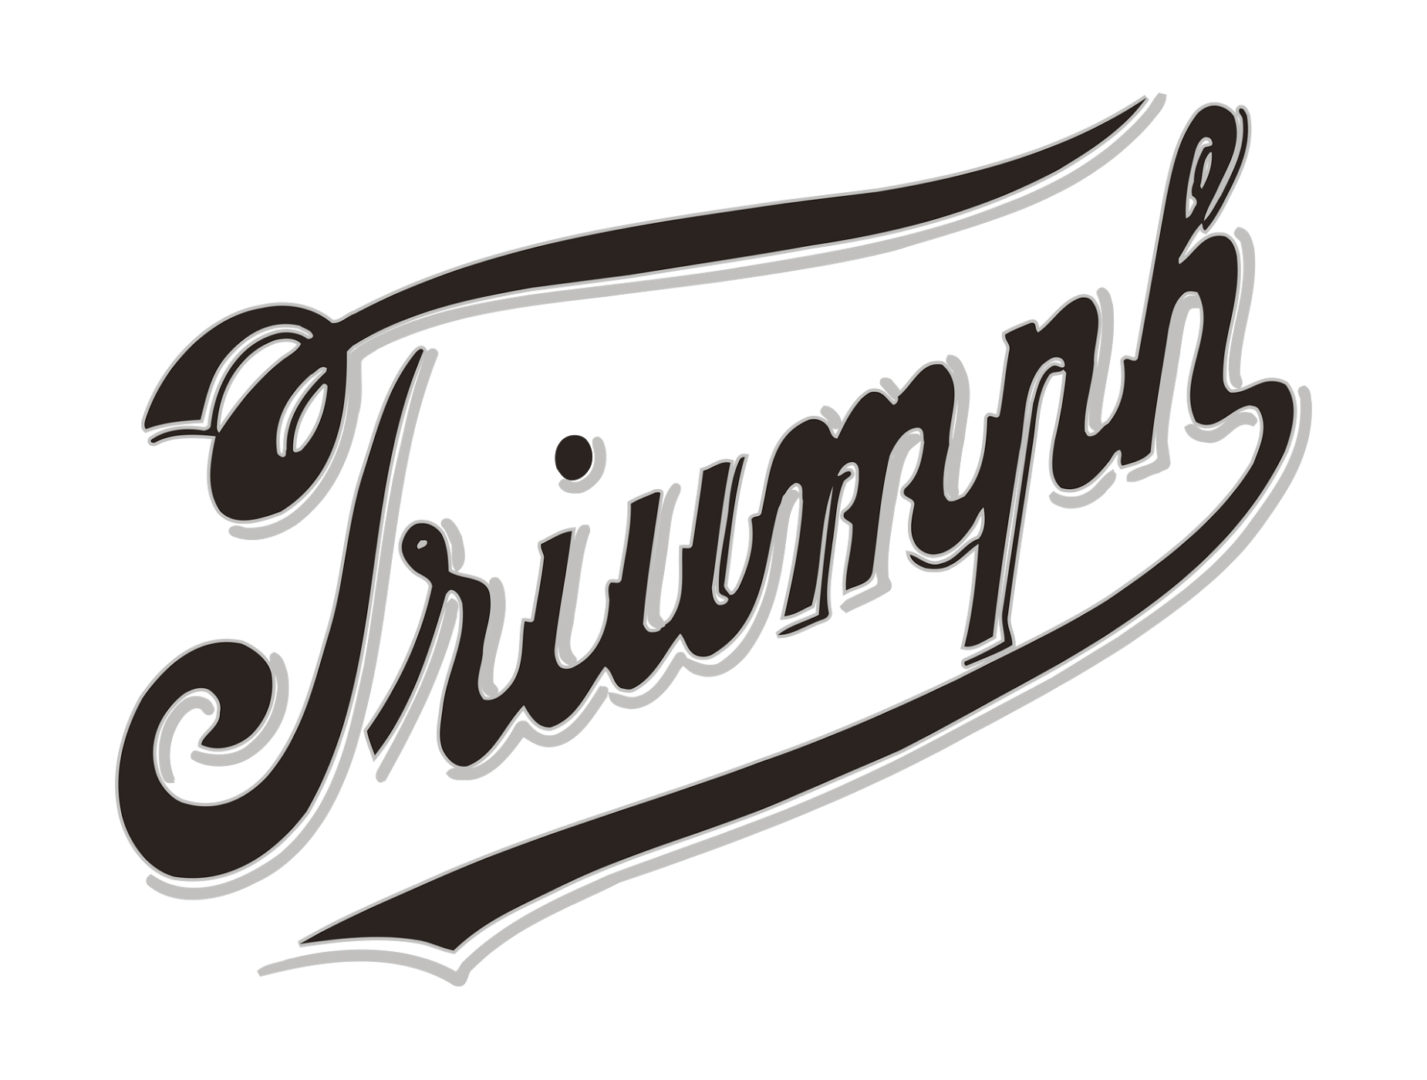 Triumph logo: history, evolution, meaning